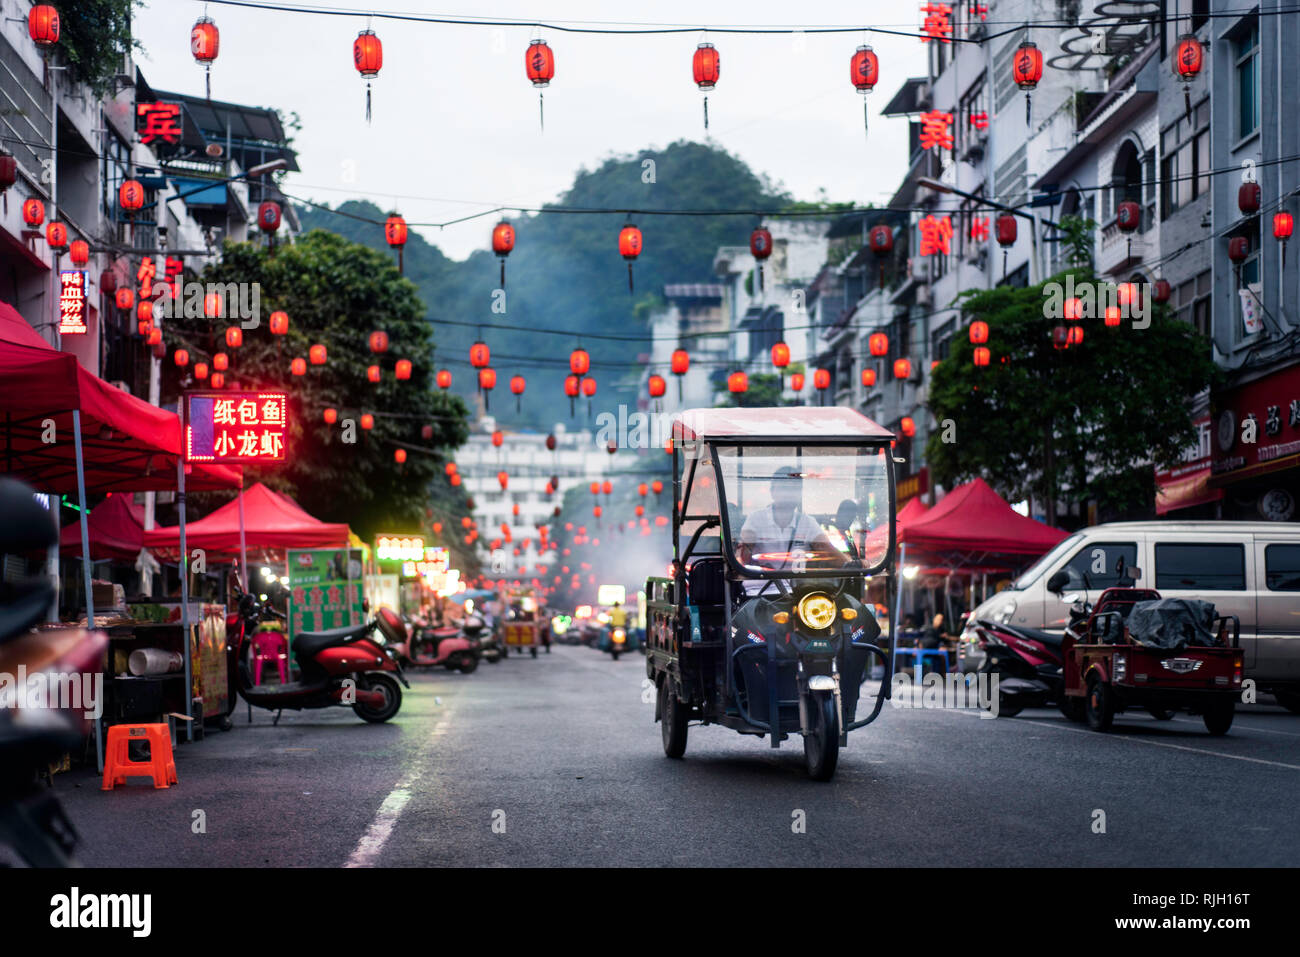 Pingxiang, China - July 3, 2018: Traditional Chinese food market street scene with people preparing for the evening busy time in Guangxi province bord Stock Photo